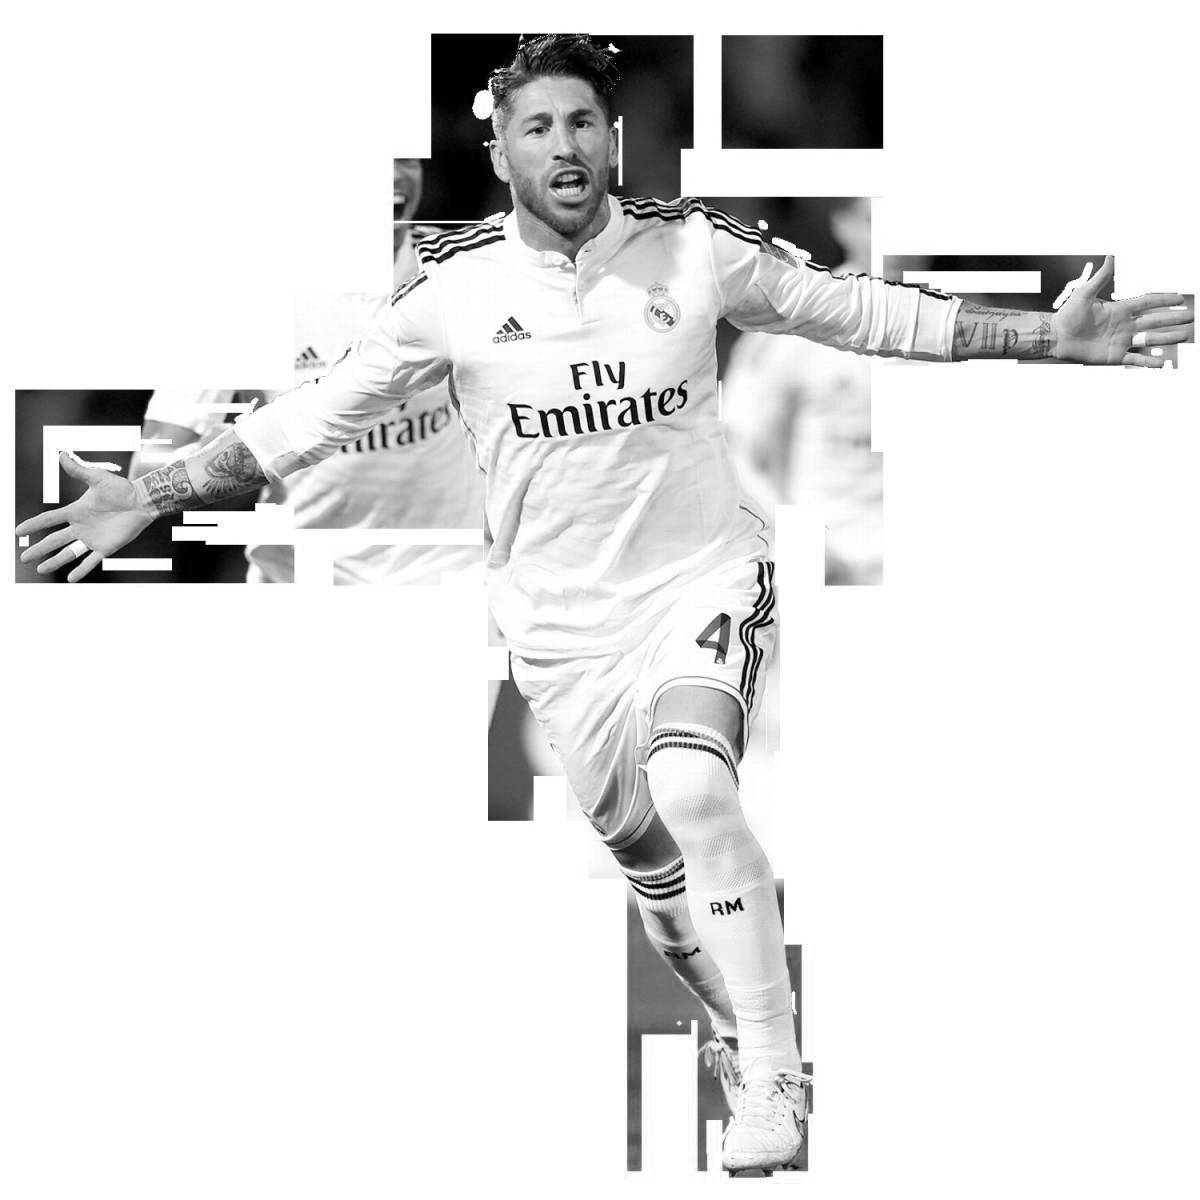 Great coloring by sergio ramos